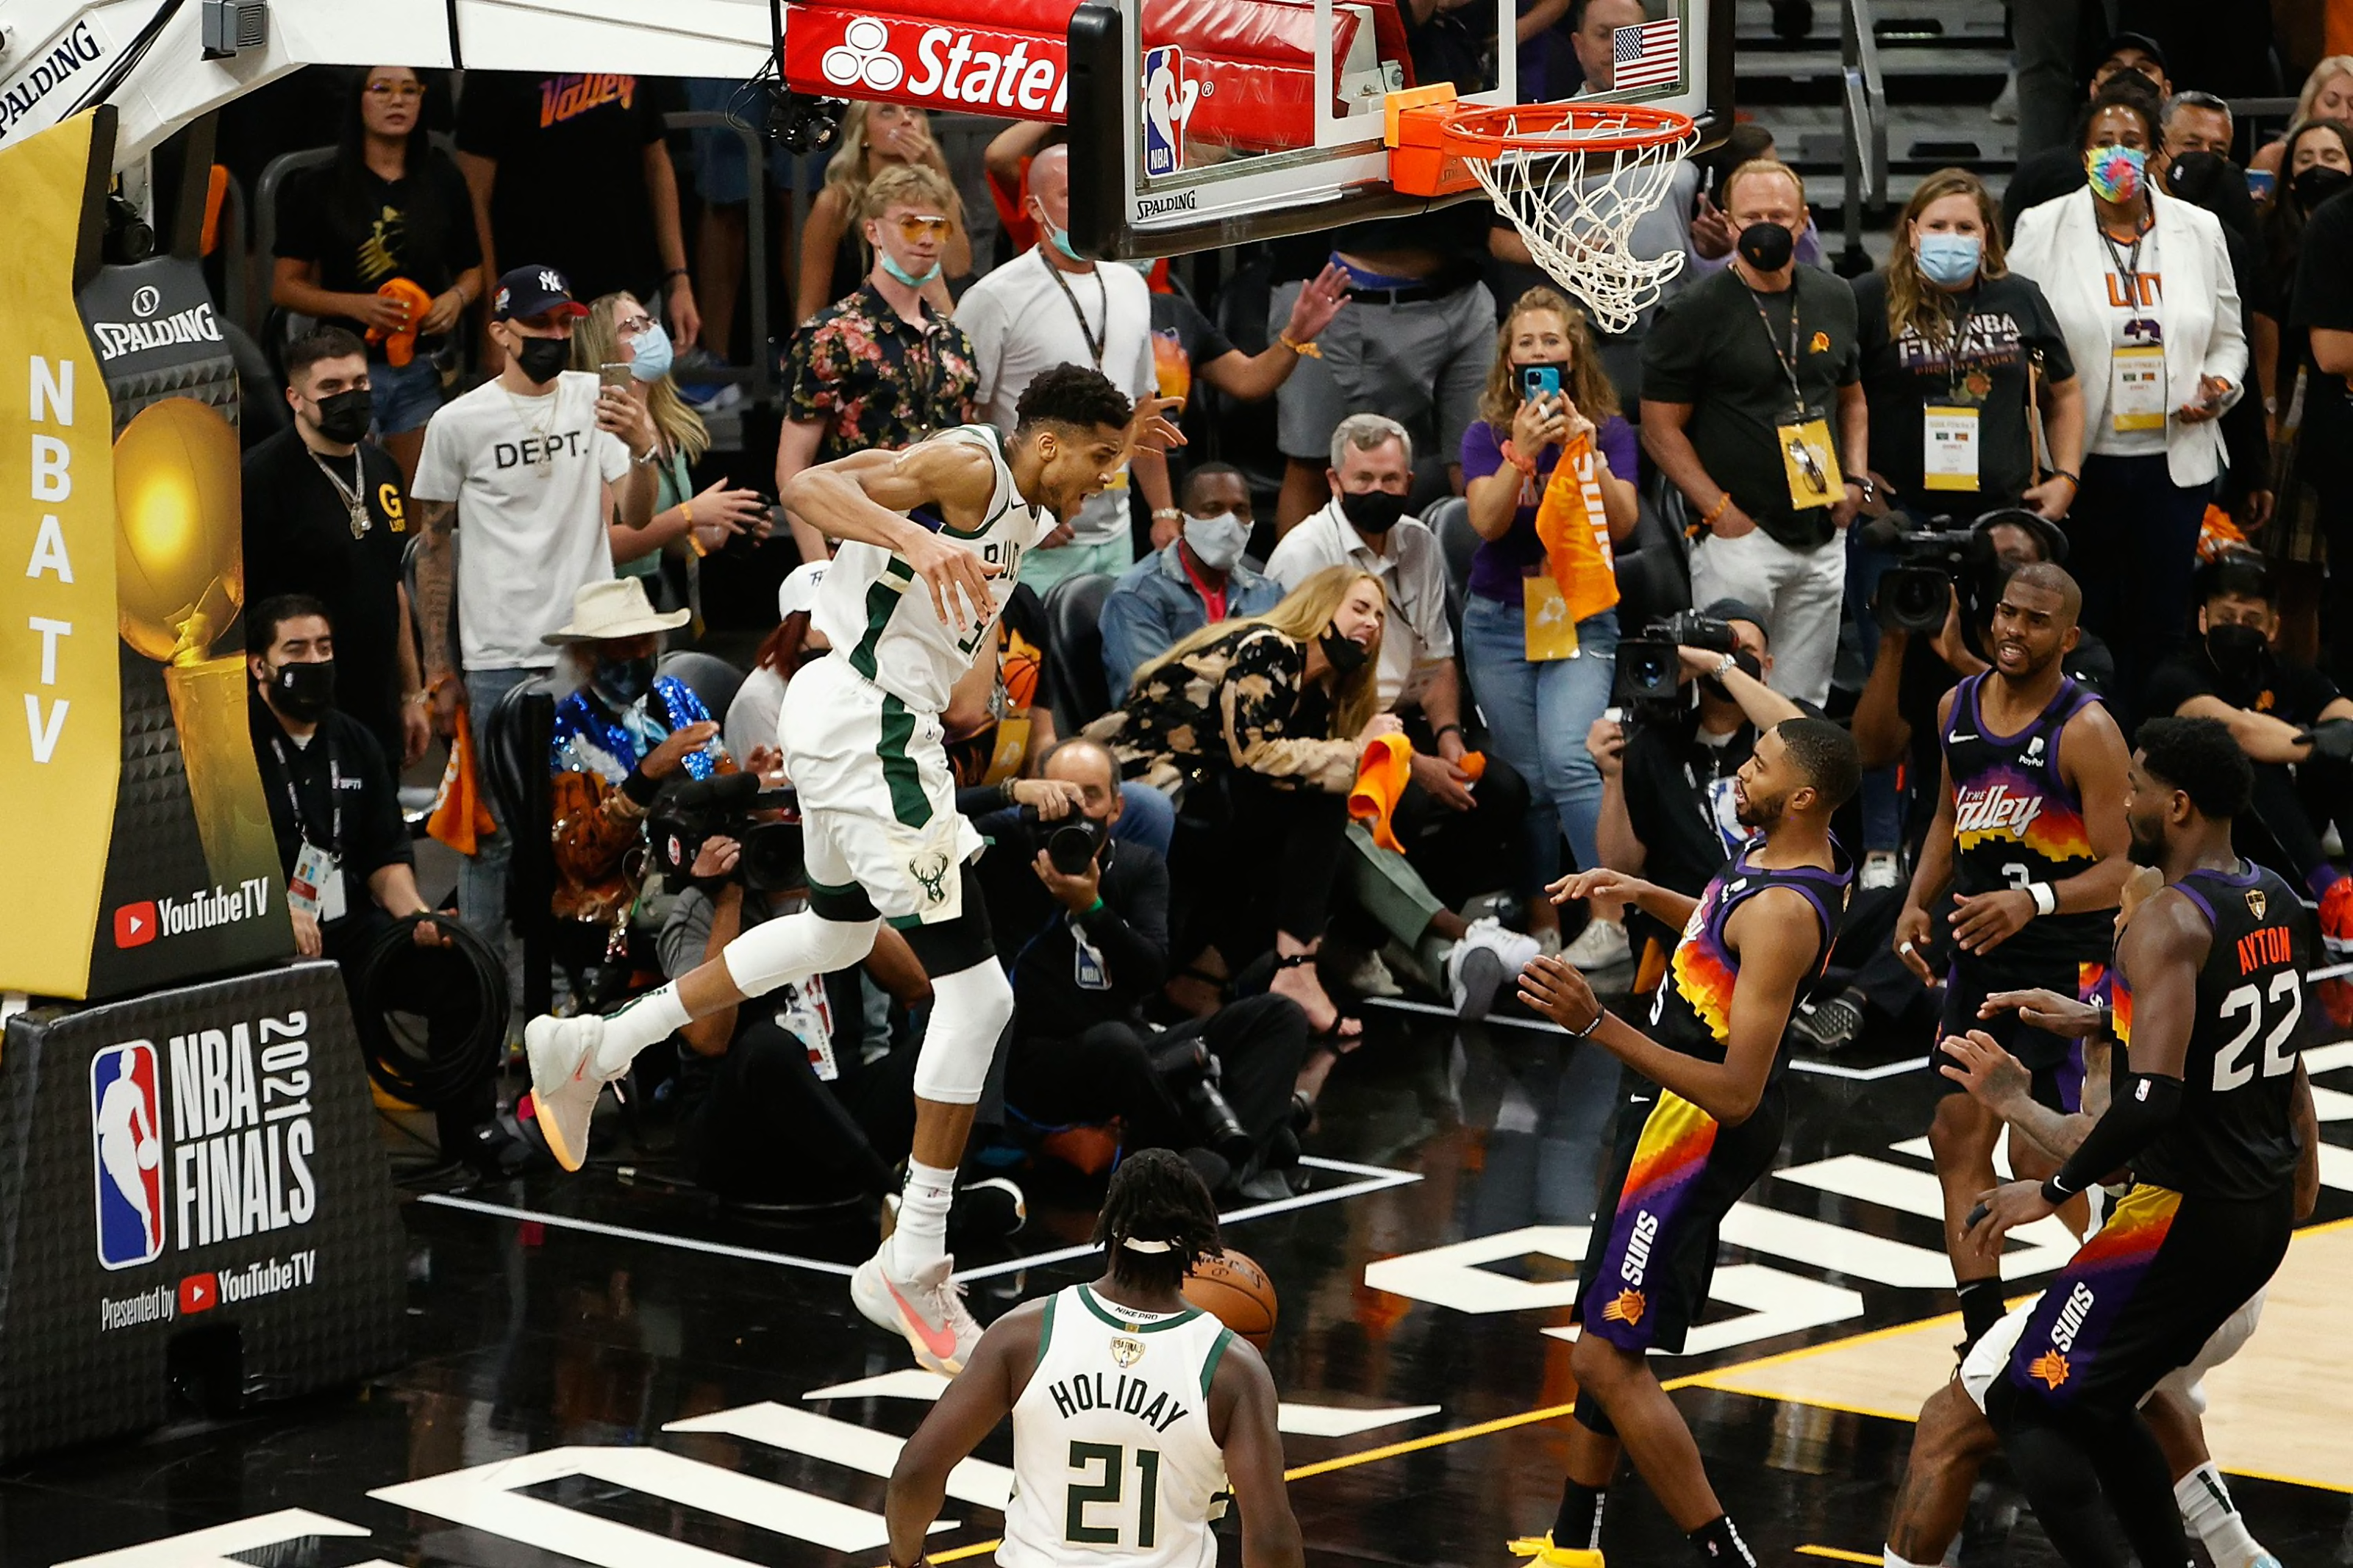 Giannis Porziņģis and Two Dunks at the Garden  The New Yorker